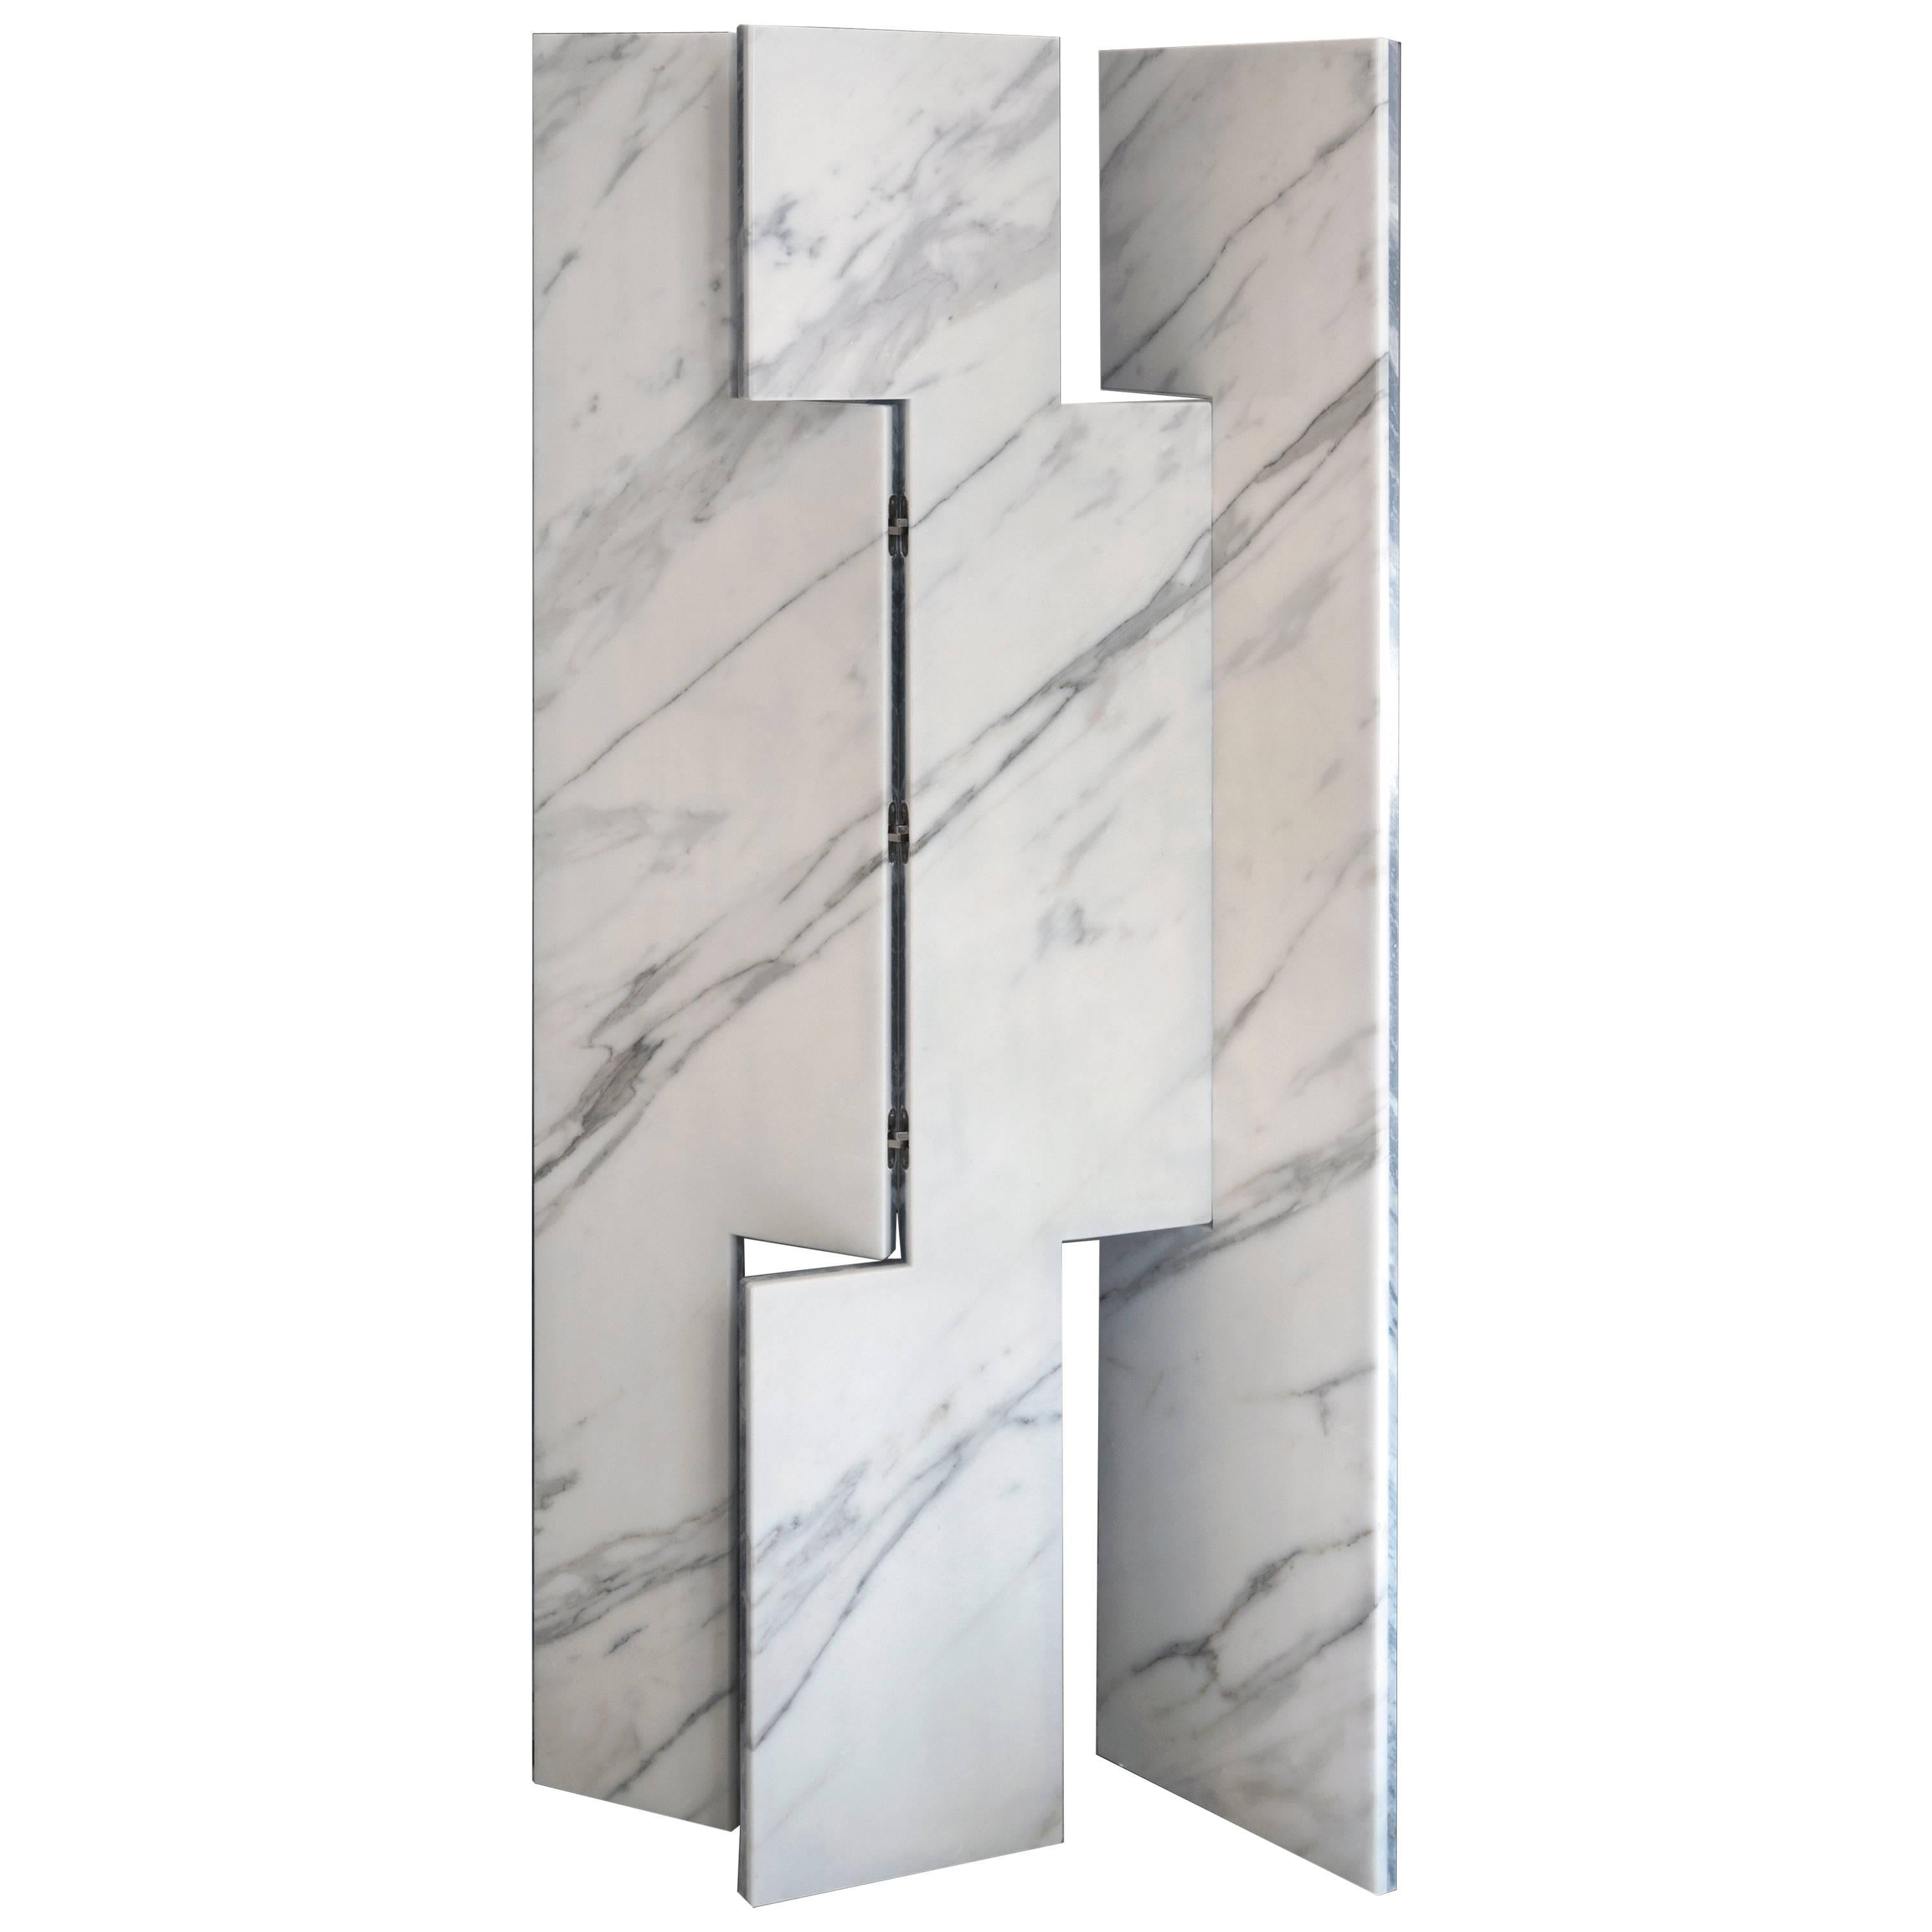 Marble Wall Screen by Paolo Ulian & Moreno Ratti for Carrara Design Factory For Sale